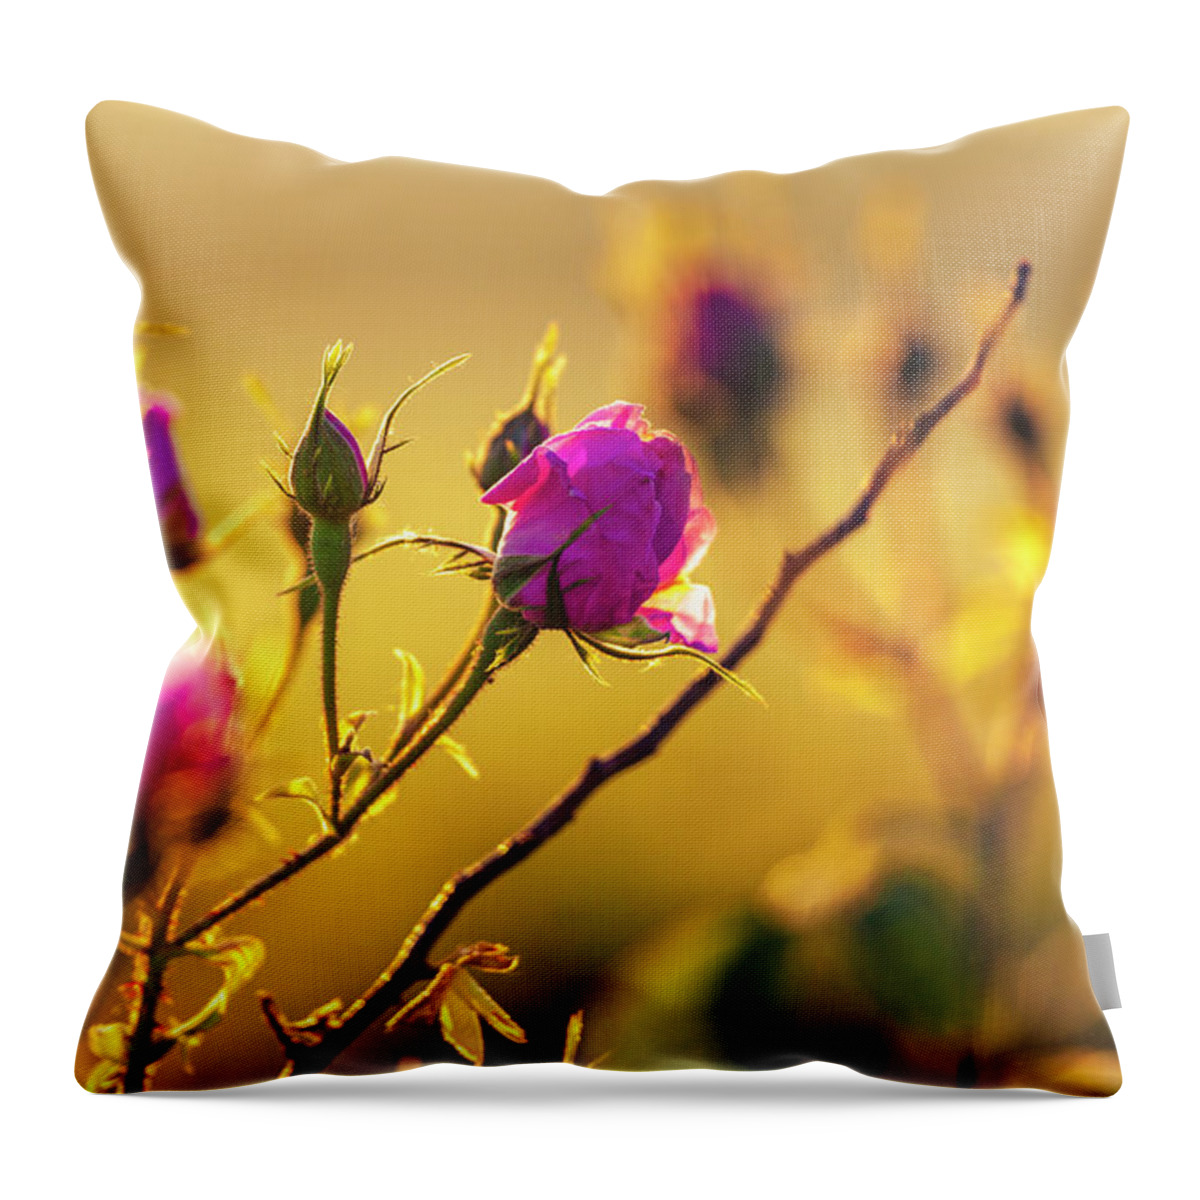 Bulgaria Throw Pillow featuring the photograph Roses In Gold by Evgeni Dinev